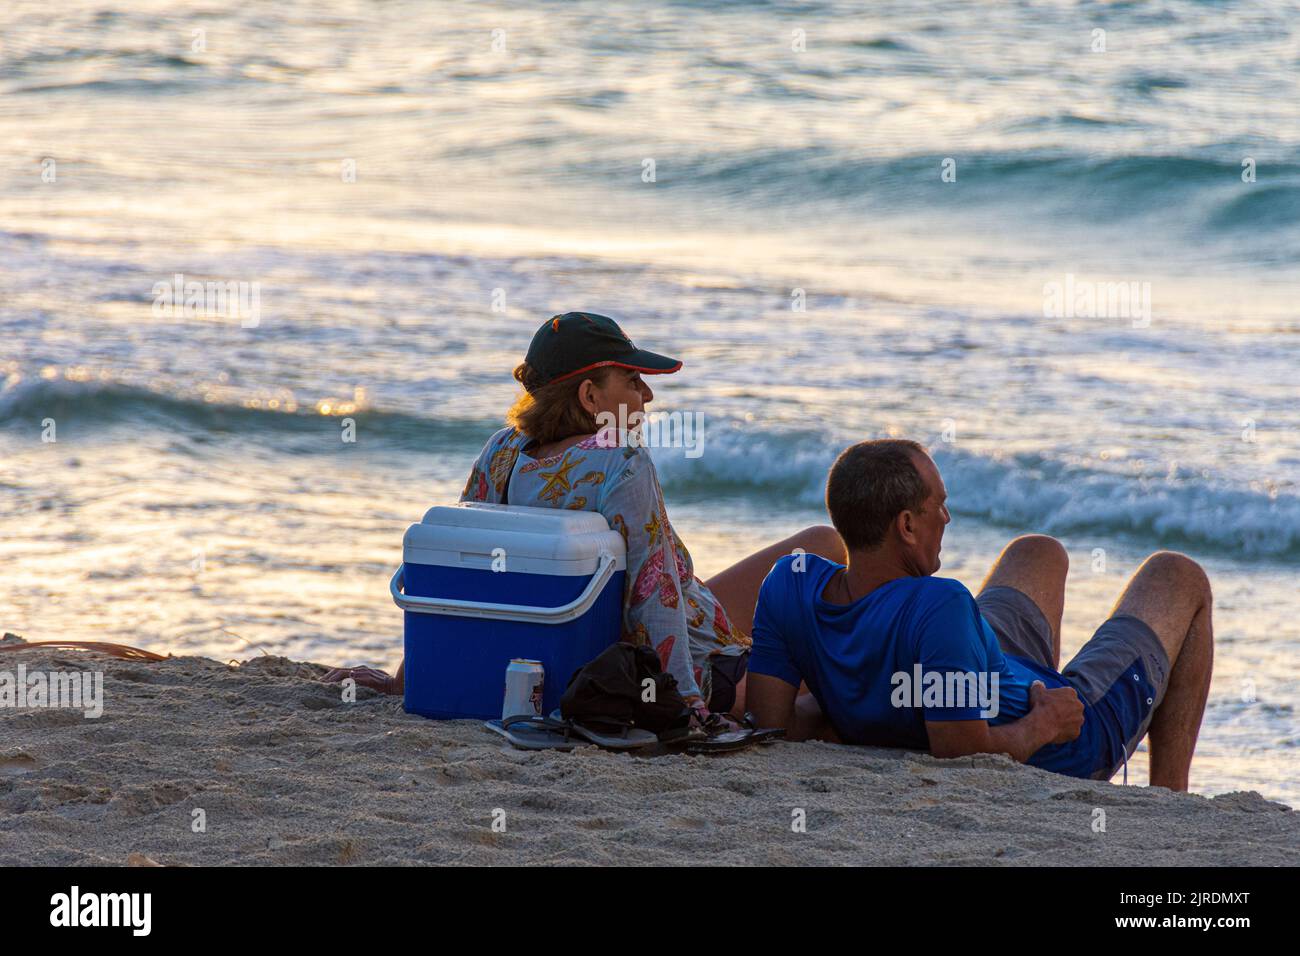 A couple in their early 30's enjoying chilling on the beach and watching the sun set, Varadero Stock Photo